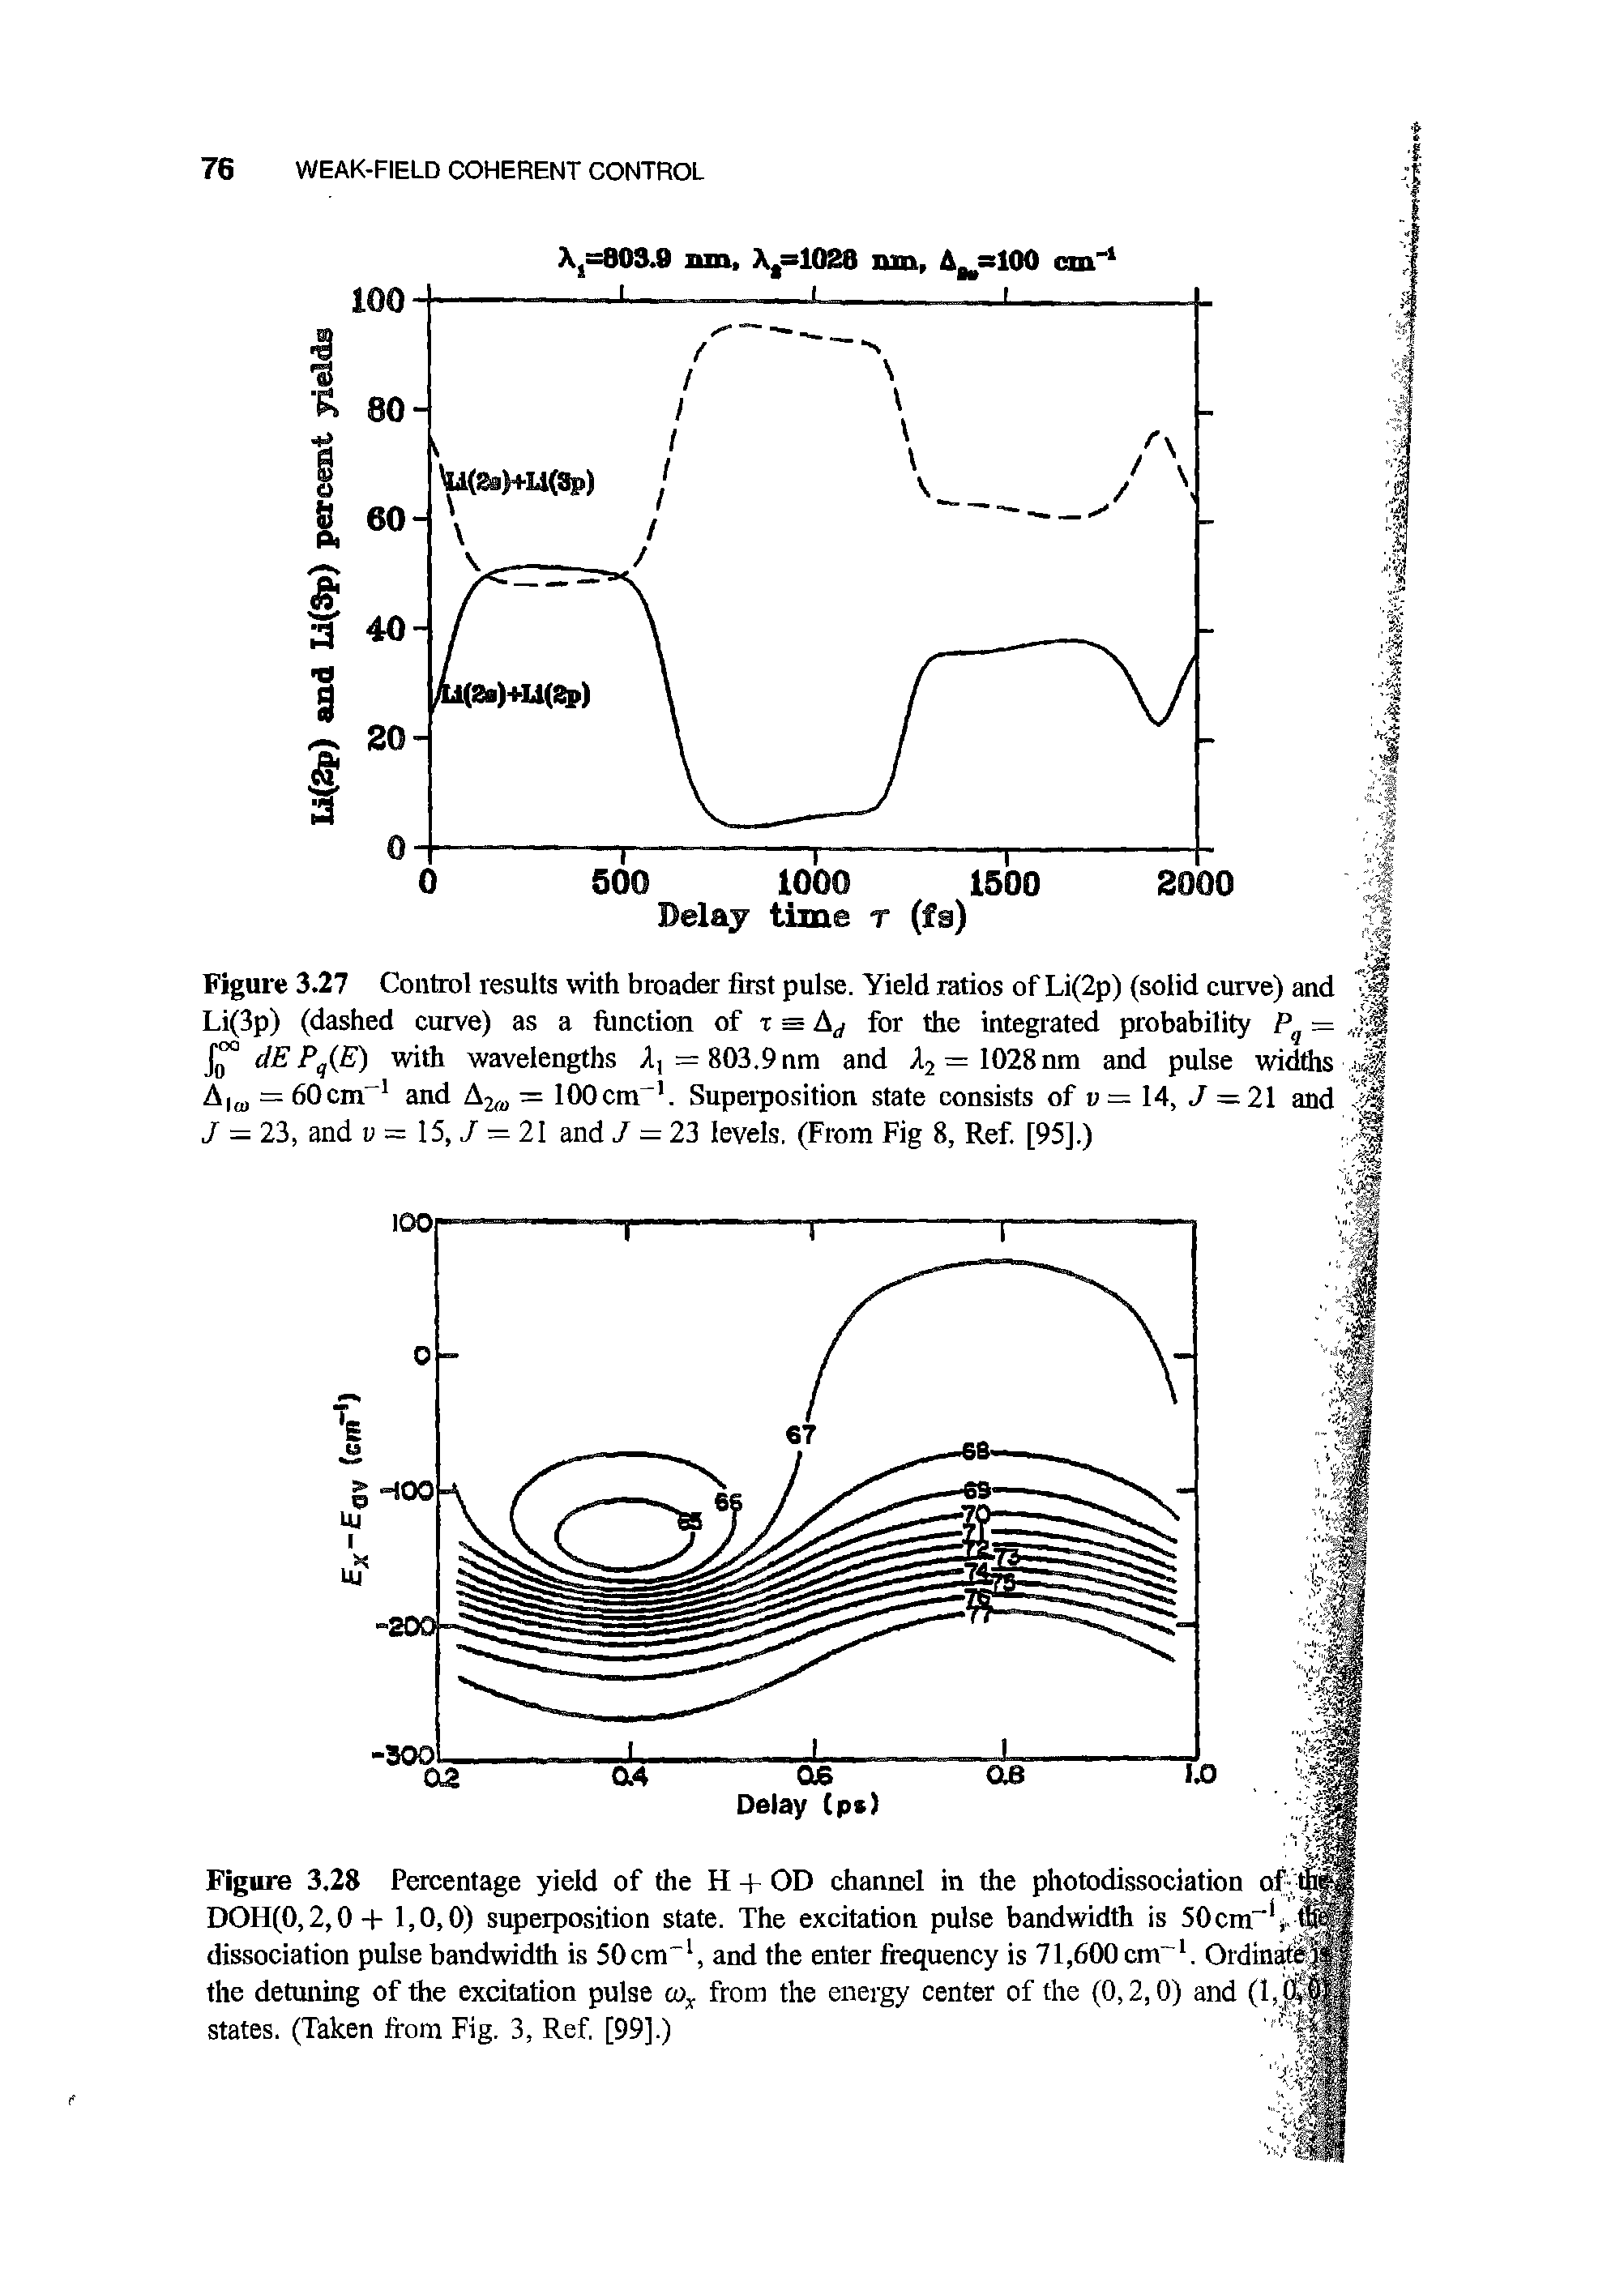 Figure 3.27 Control results with broader first pulse. Yield ratios of Li(2p) (solid curve) and Li(3p) (dashed curve) as a function of x = Ad for the integrated probability P = dE Pq(E) with wavelengths A, = 803.9 nm and X2 = 1028 nm and pulse widths Alt0 = 60cm1 and A2(B = 100cm. Superposition state consists of v = 14, J — 21 and J — 23, and v = 15, J = 21 and J — 22 levels. (From Fig 8, Ref. [95].)...